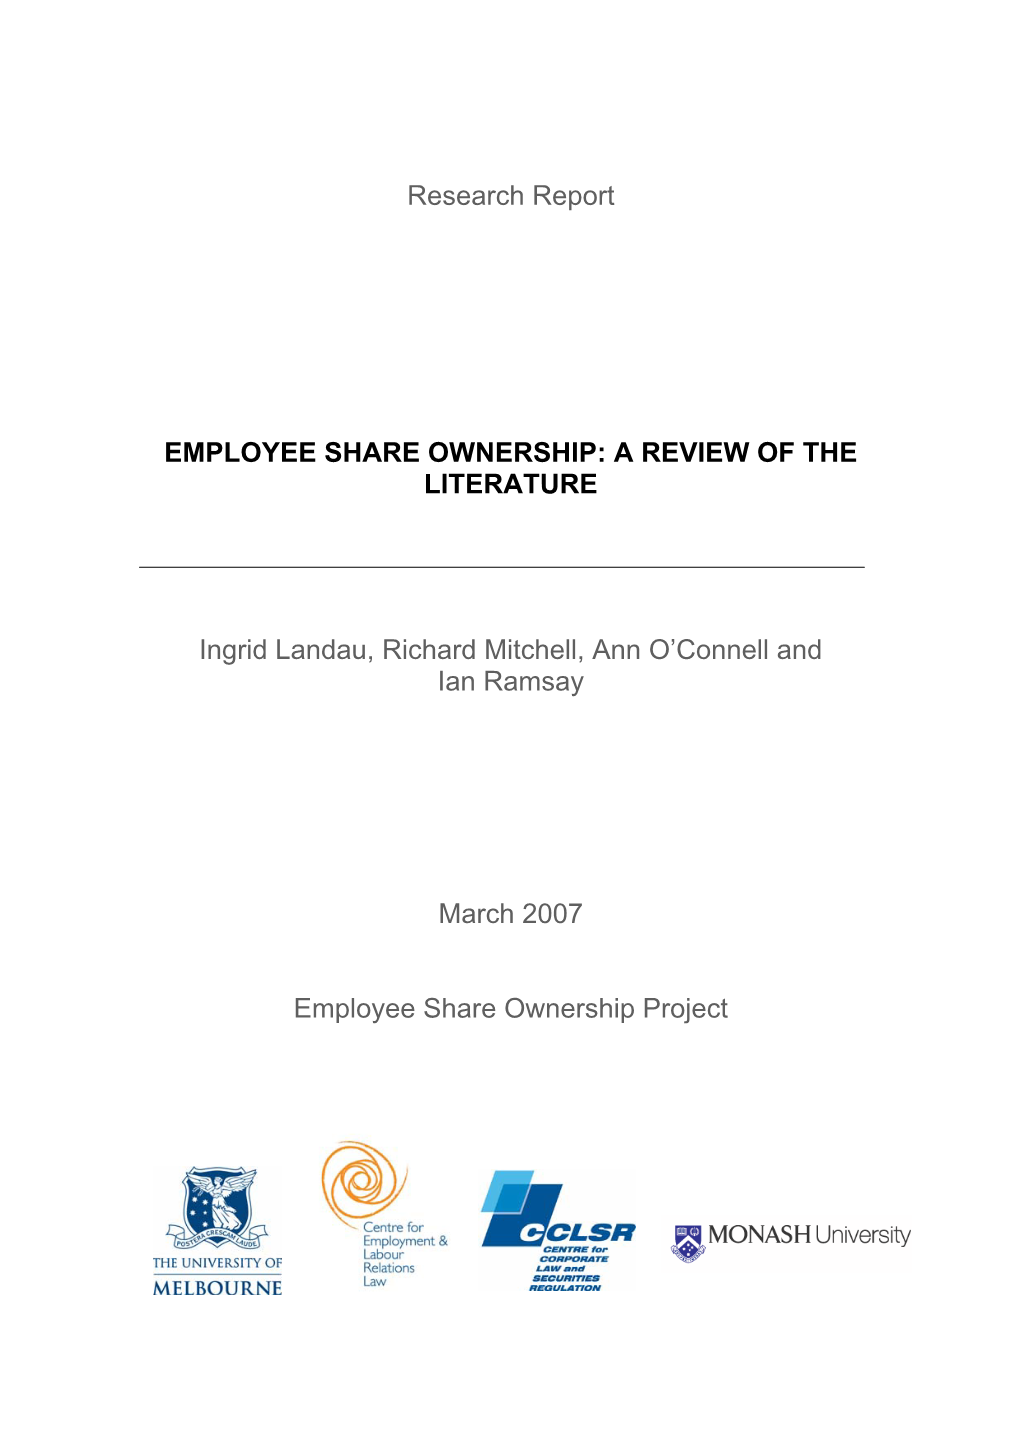 Employee Share Ownership: a Review of the Literature